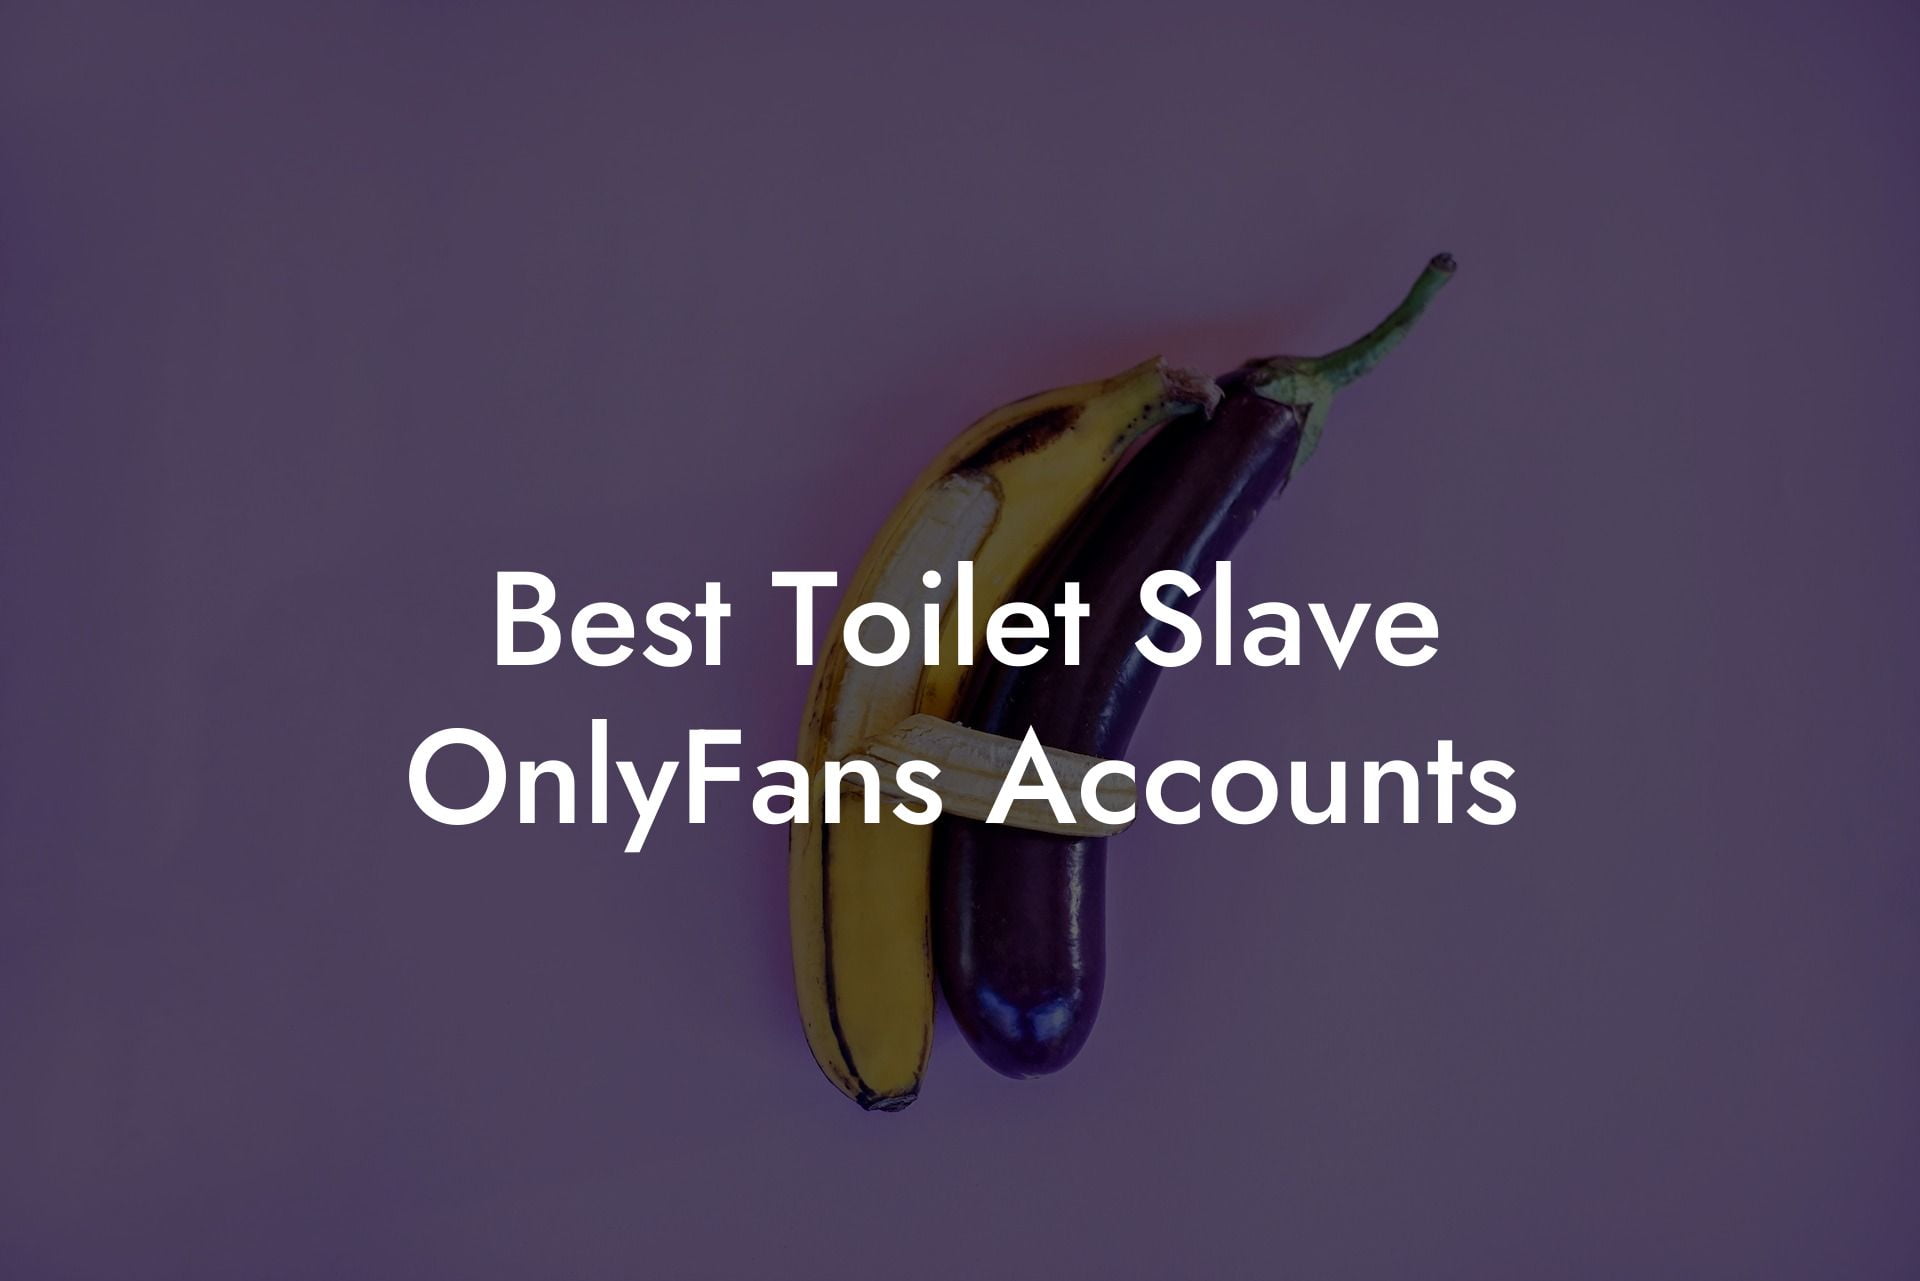 Best Toilet Slave OnlyFans Accounts